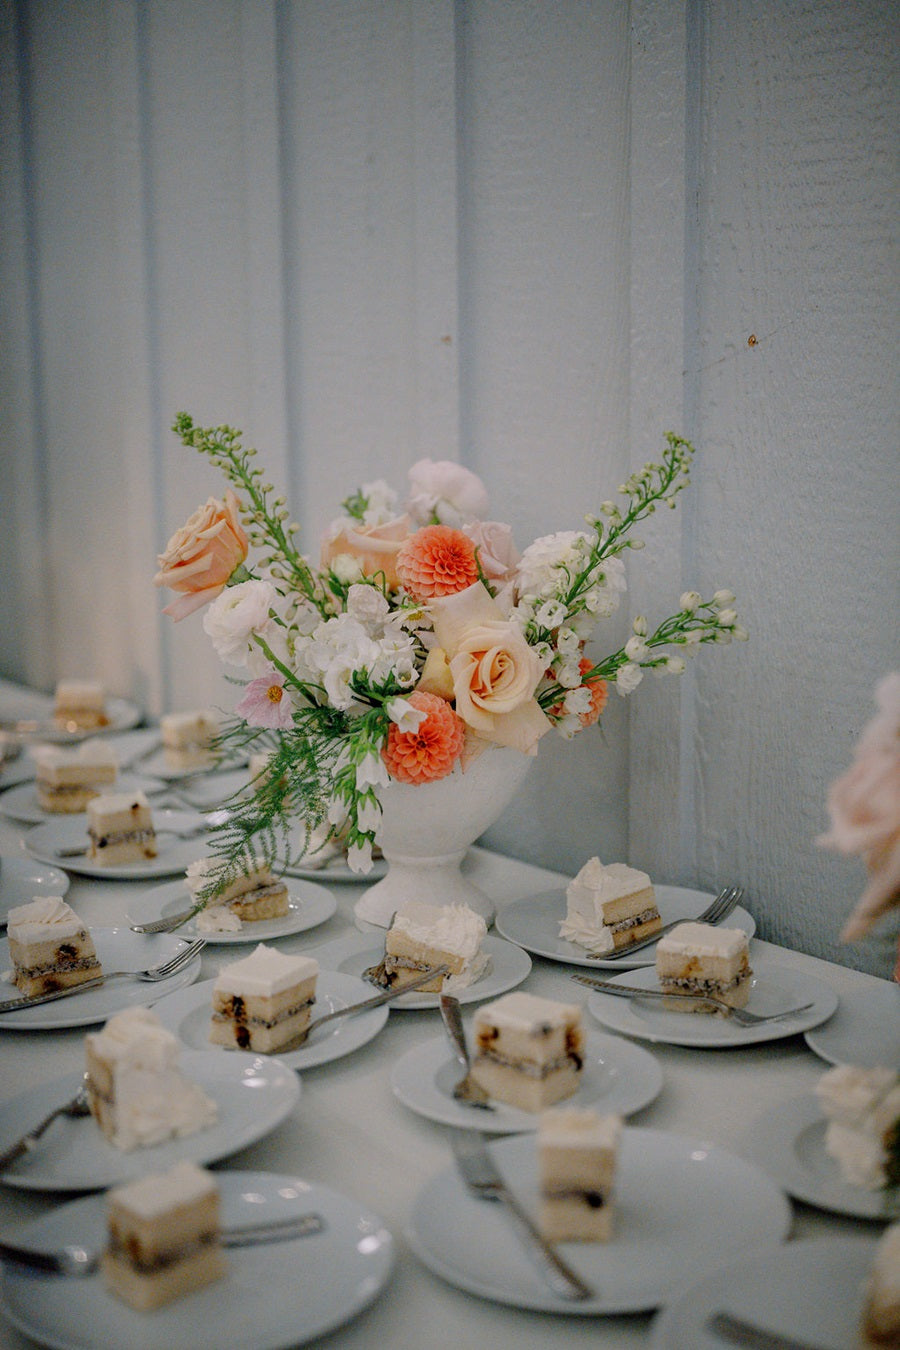 A floral arrangement with whites, peach, orange, and green, placed on the dessert table. The rest of the table is covered in places full of cake slices.